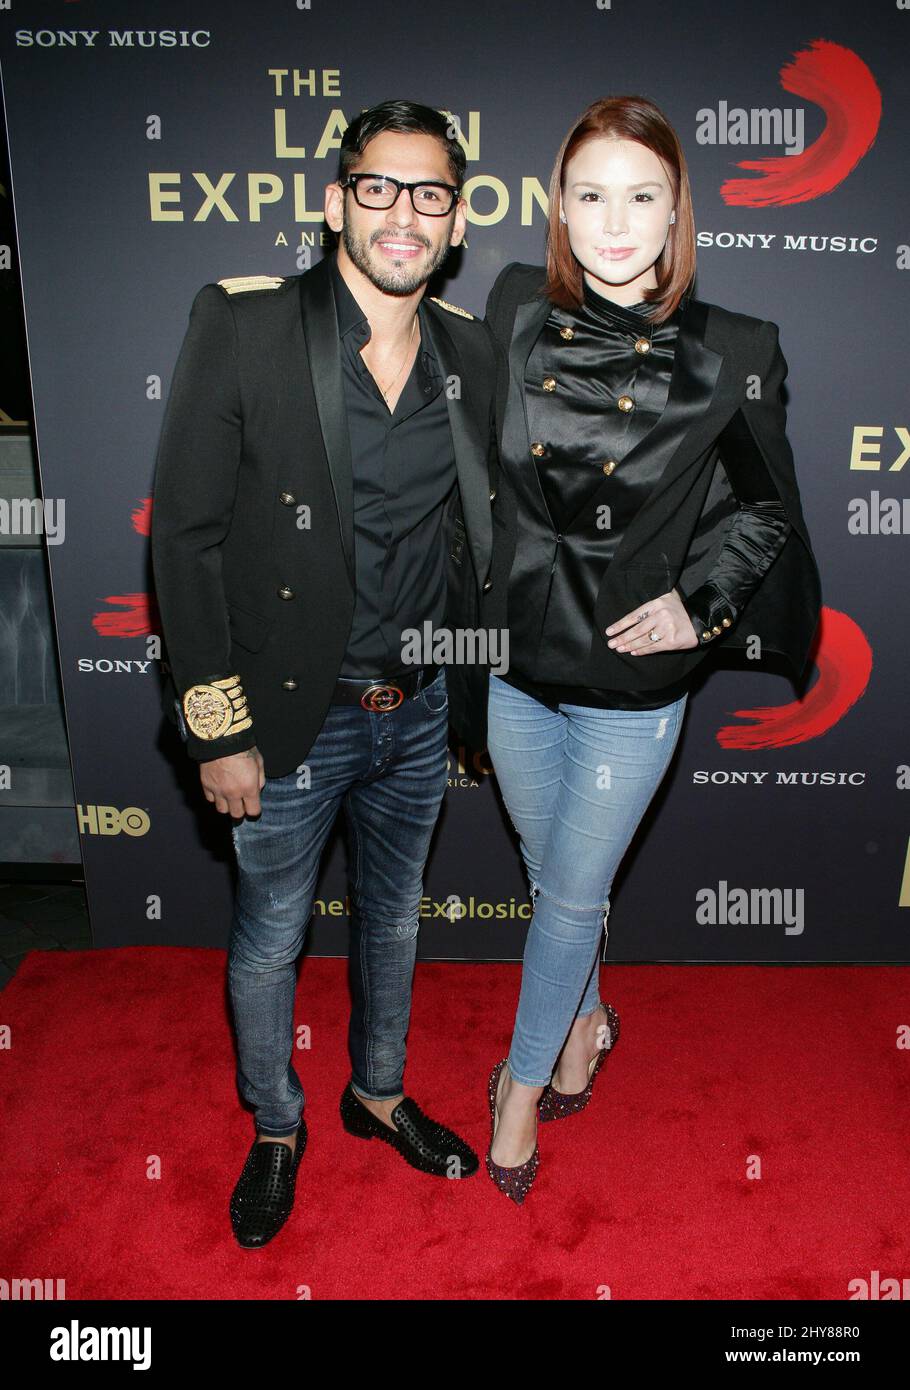 Jorge Linares, Michelle Linares attending THE LATIN EXPLOSION: A NEW AMERICA Documentary Premiere on HBO, Cosmopolitan Hotel, Las Vegas. Stock Photo